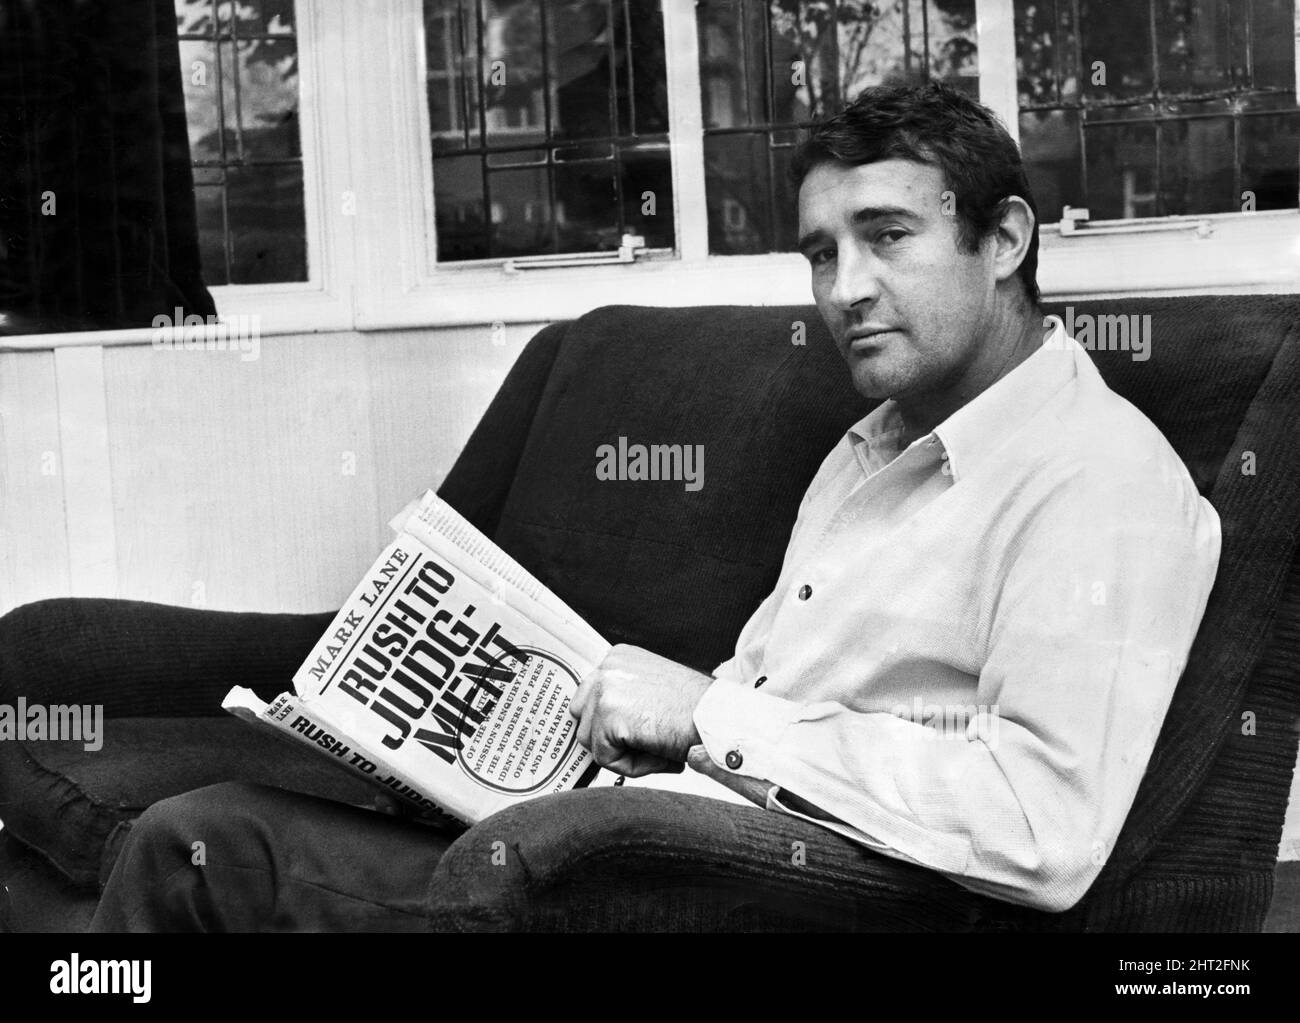 Manchester City assistant manager Malcolm Allison pictured at home reading his book 'Rush To Judgement' after Sunday lunch. Allison is alleged to have been reported to the FA by two referees for misconduct. 16th October 1966. Stock Photo